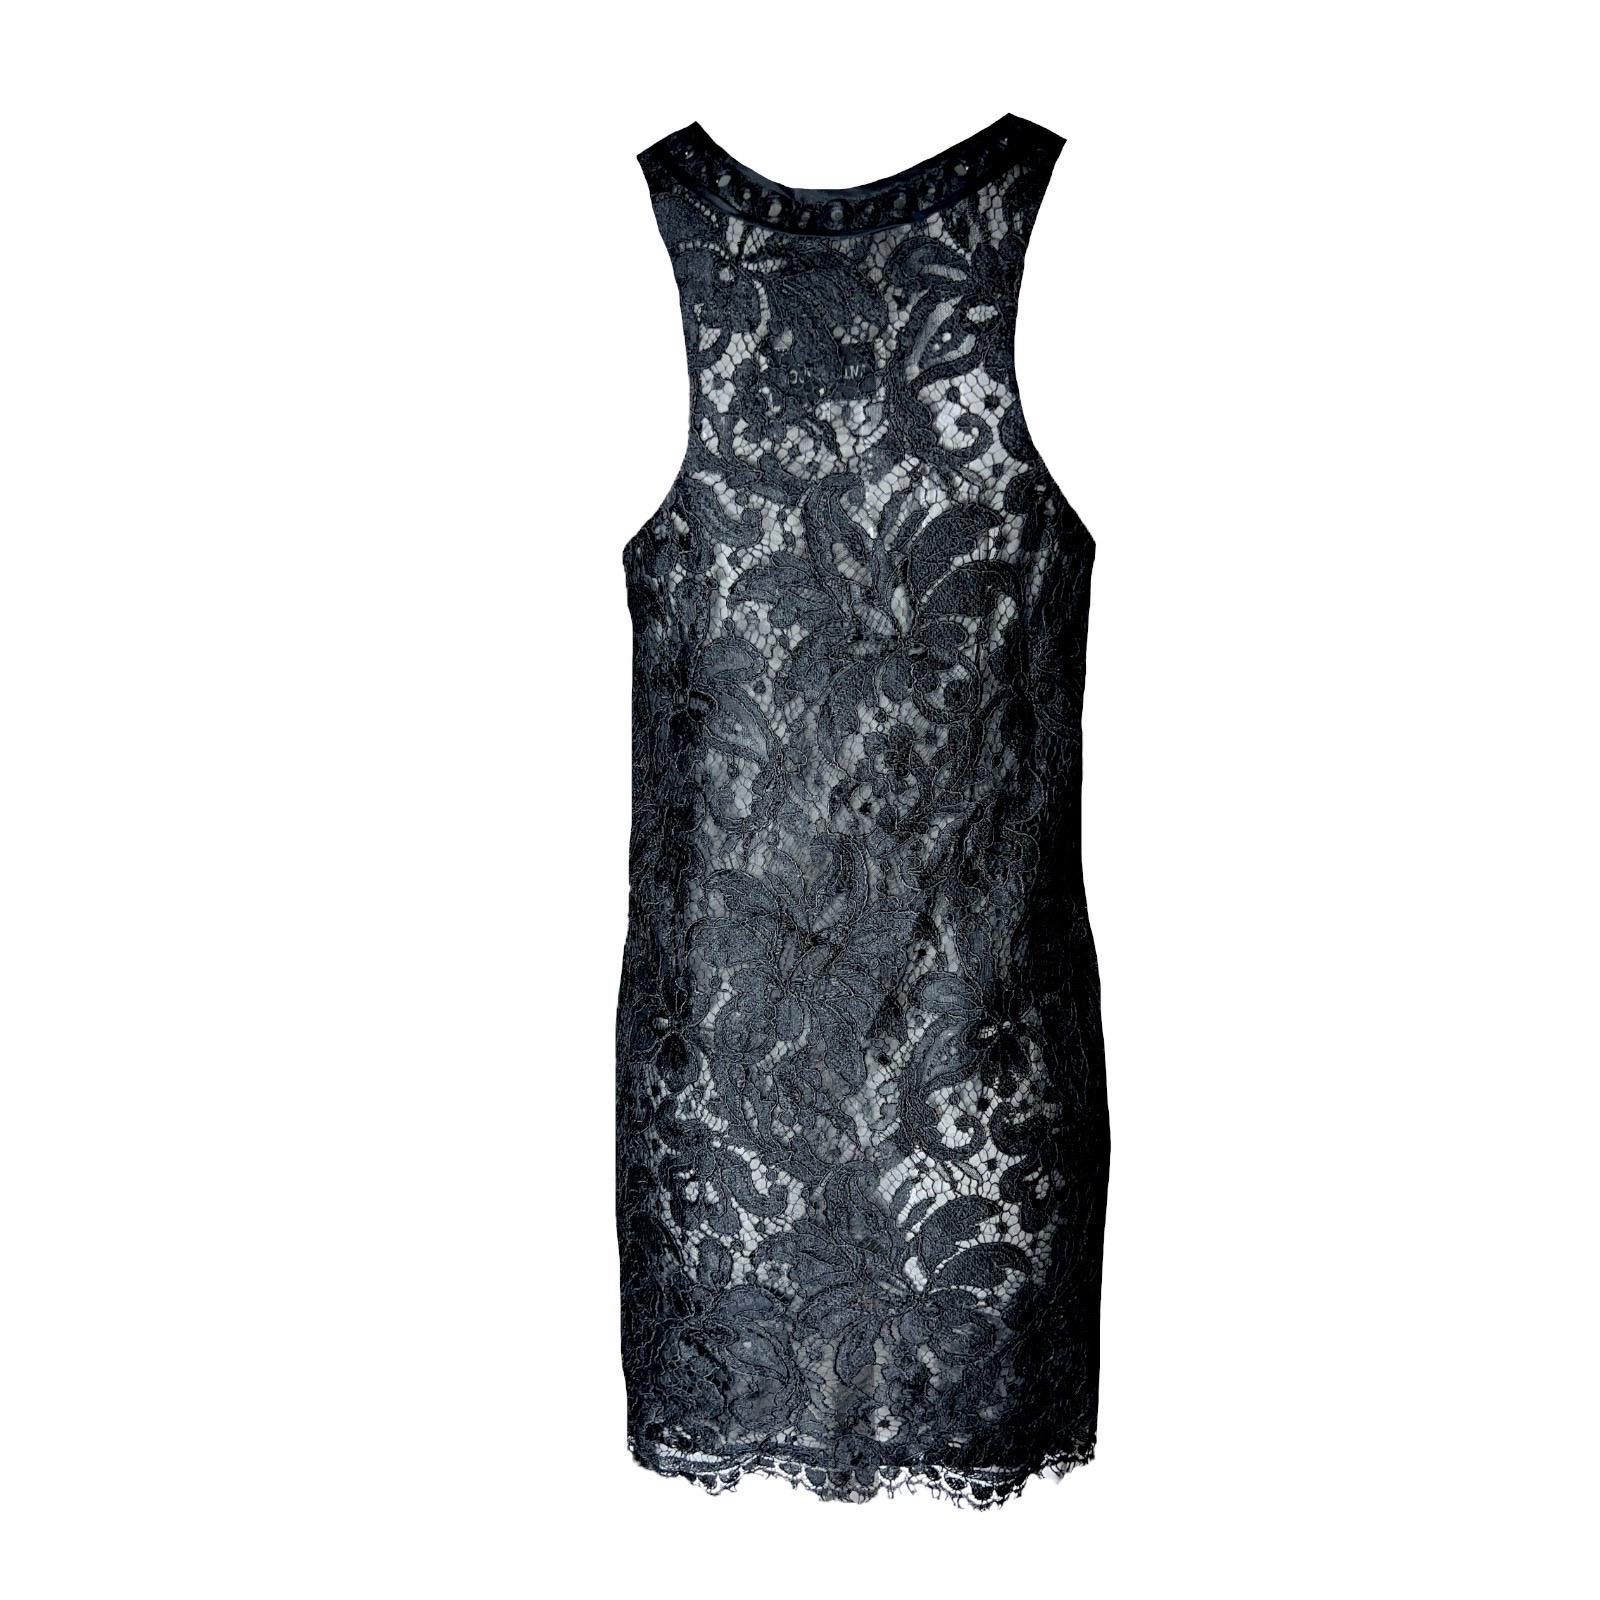 Stunning Emilio Pucci dress
Designed by Peter Dundas
Sexy lace-up adjustable décolleté 
Mirror Details
Finest French lace
Scalloped hem
Made In Italy
Dry Clean Only
Retails for 3799$
Size IT 38 US 4
Unworn